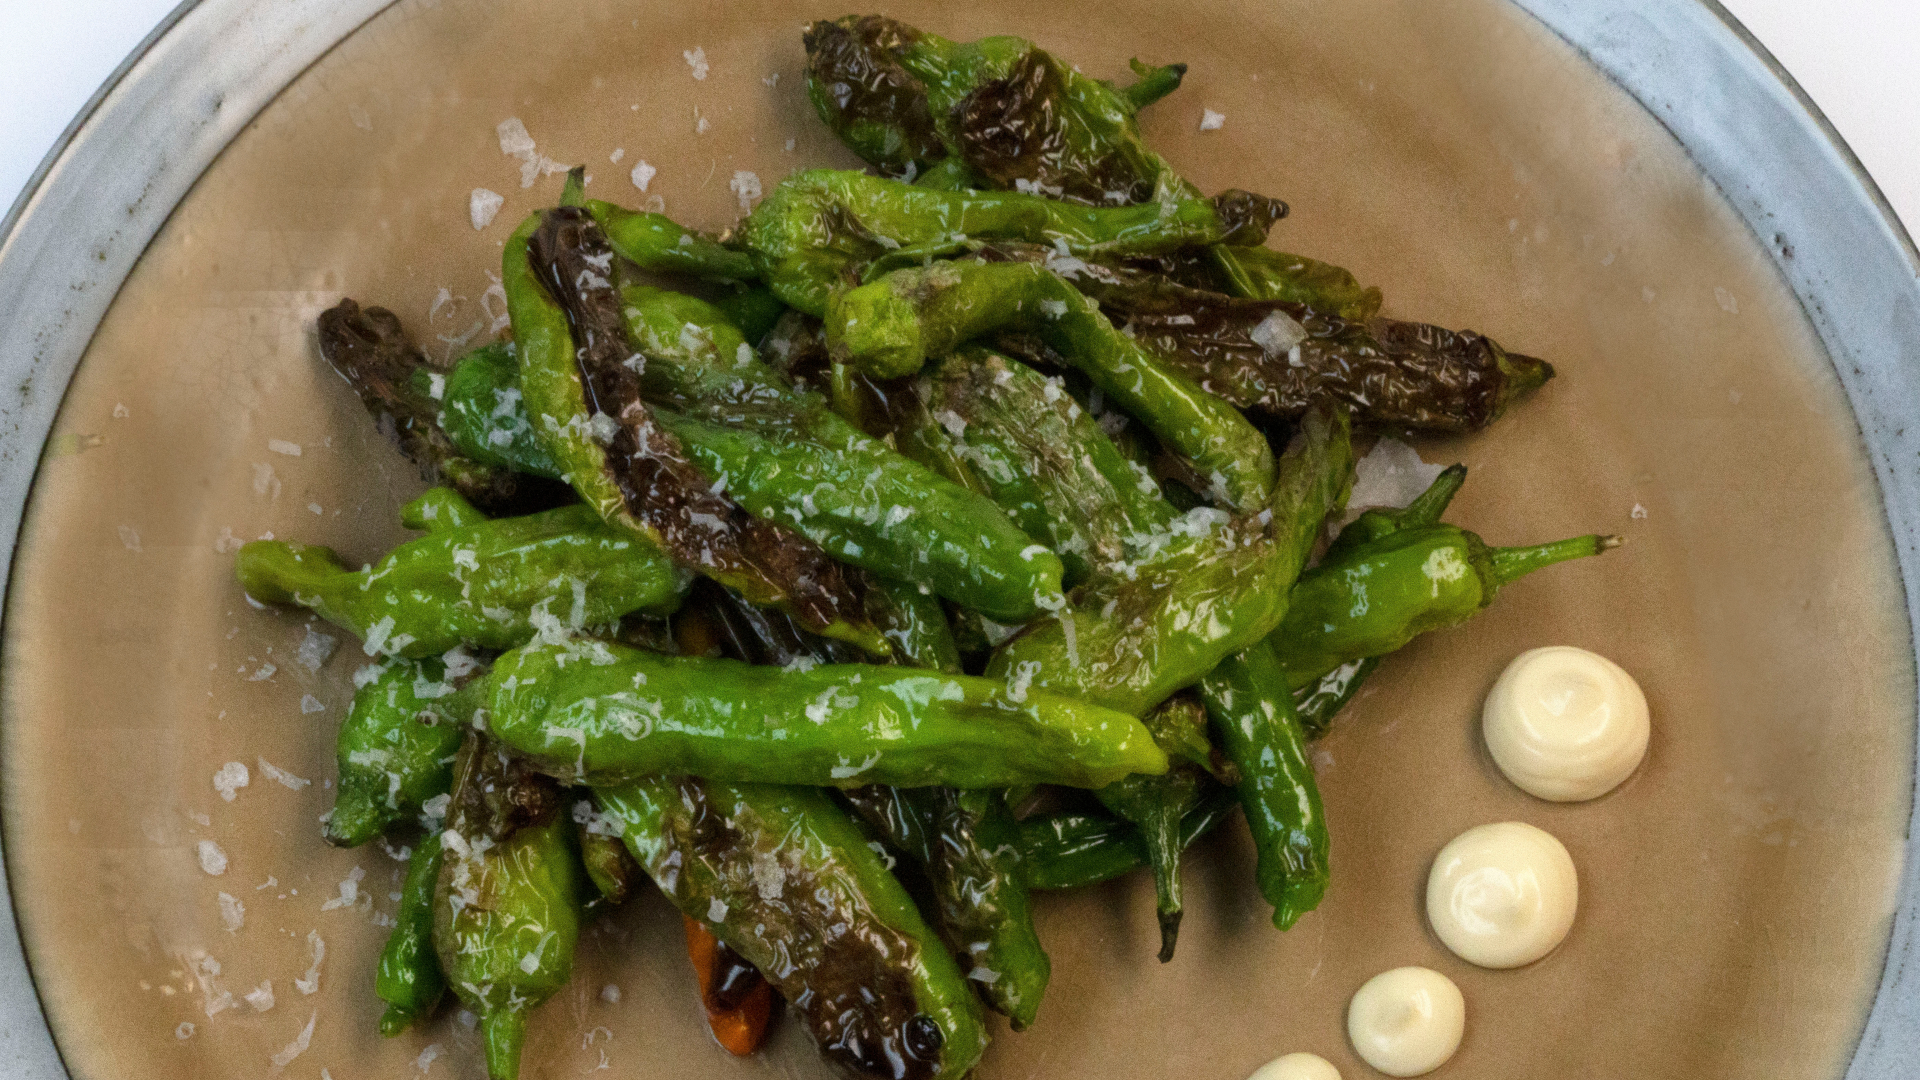 Shishito peppers with aioli